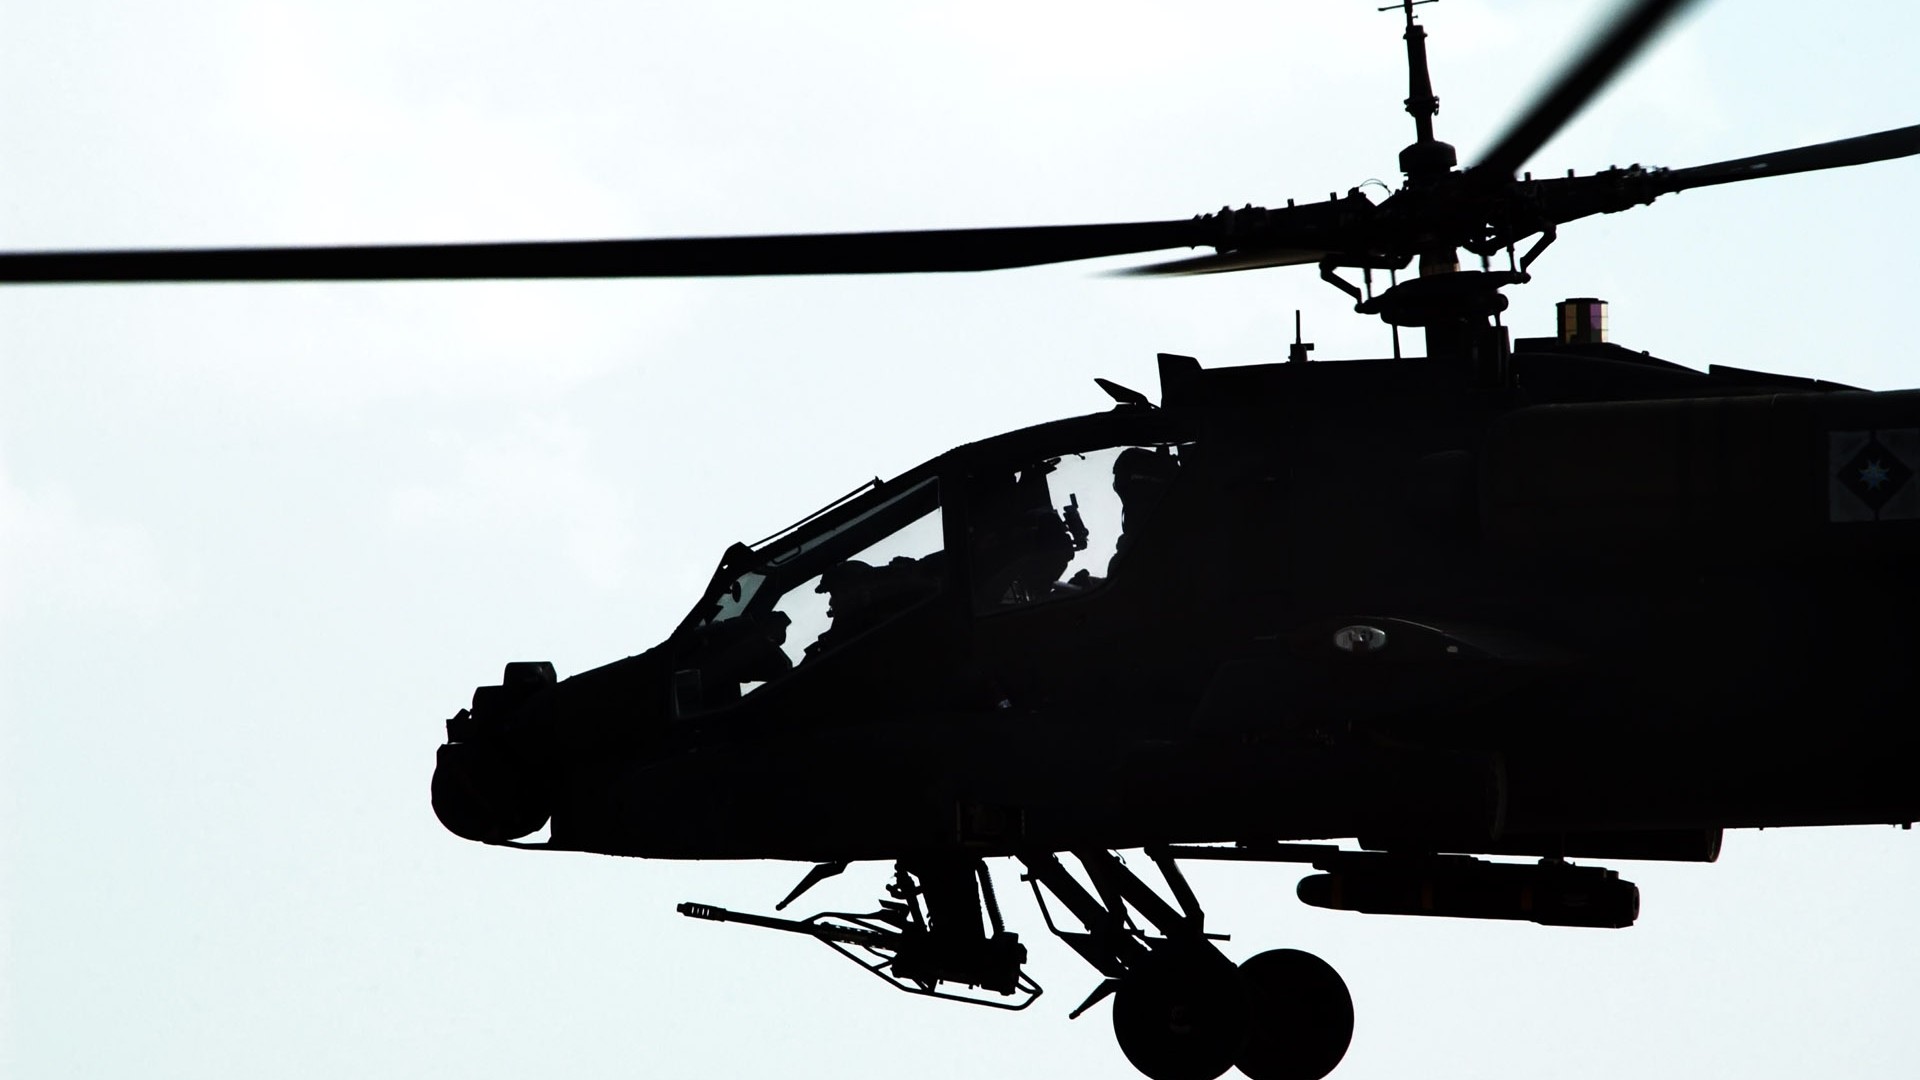 Military Aircraft Sky AH 64 Apache Helicopters Military Aircraft 1920x1080